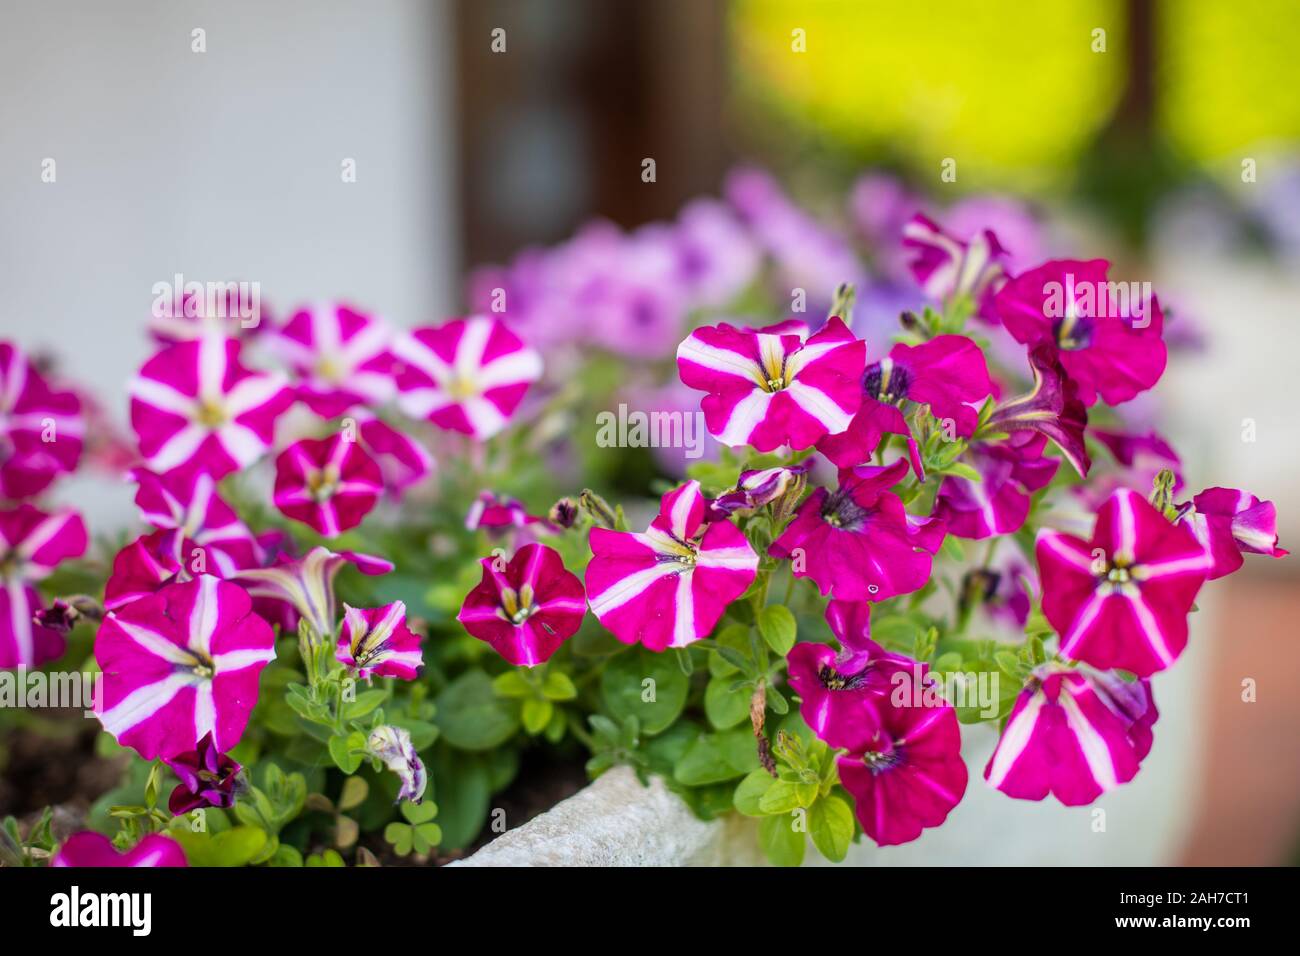 Close up of a flower pot full of purple and white petunias, against a green bokeh background Stock Photo